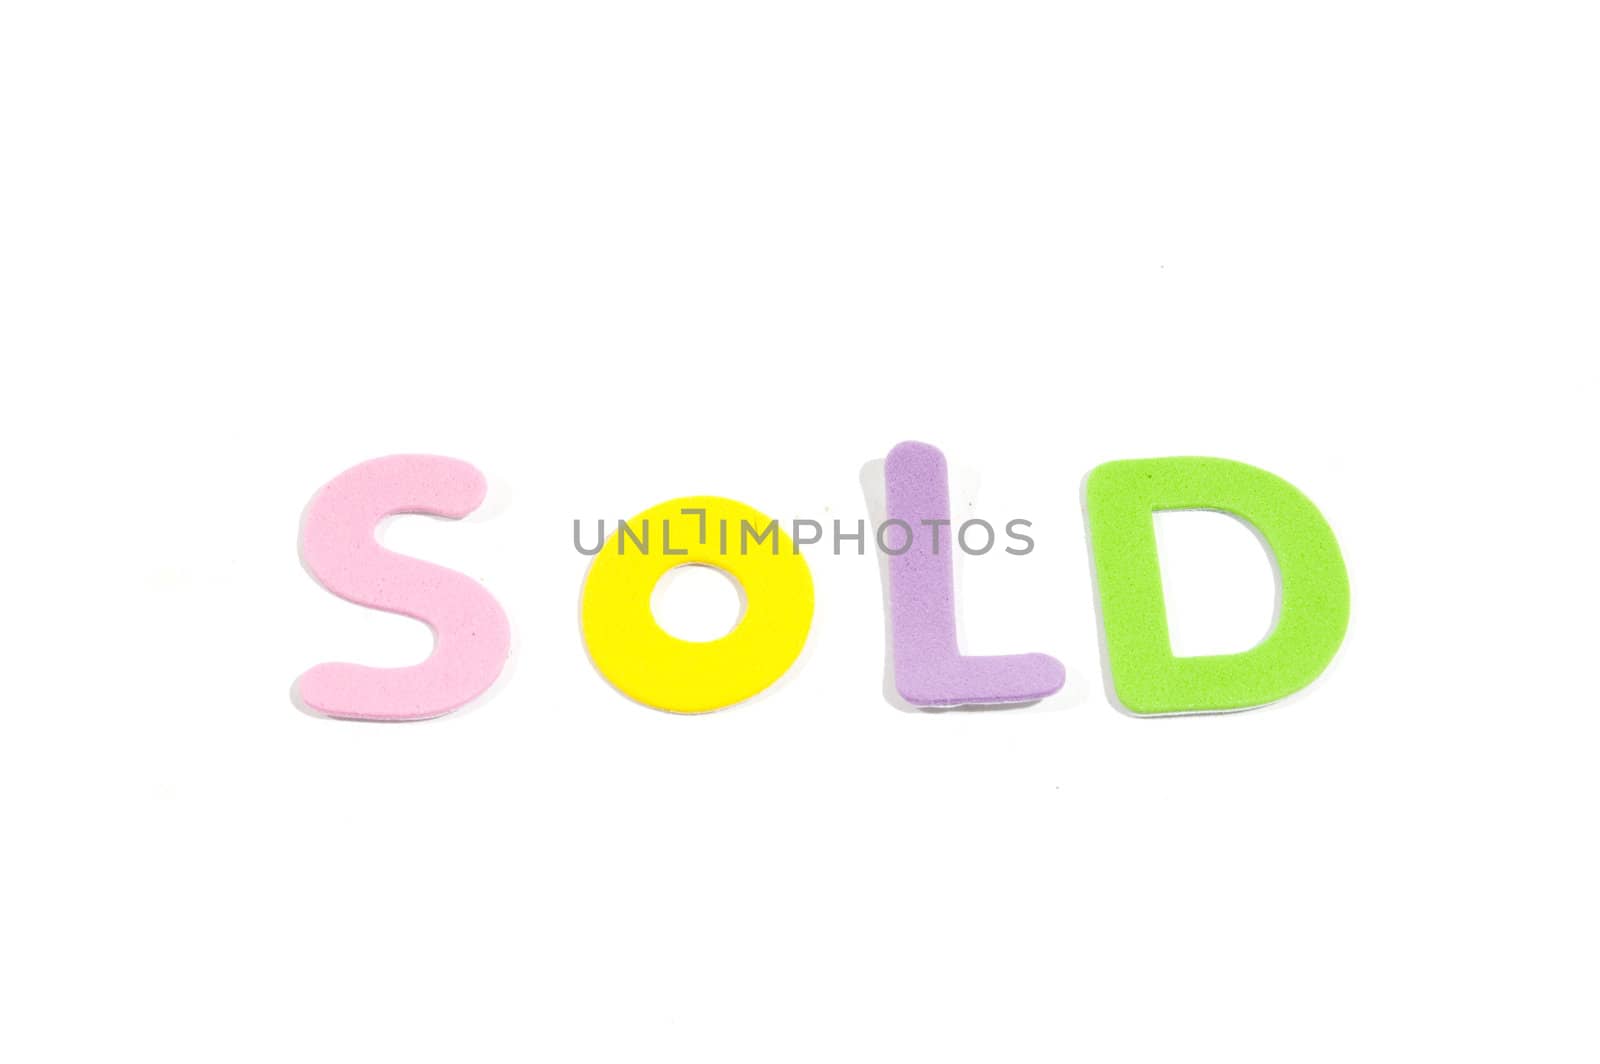 sold in colorfull letters by ladyminnie